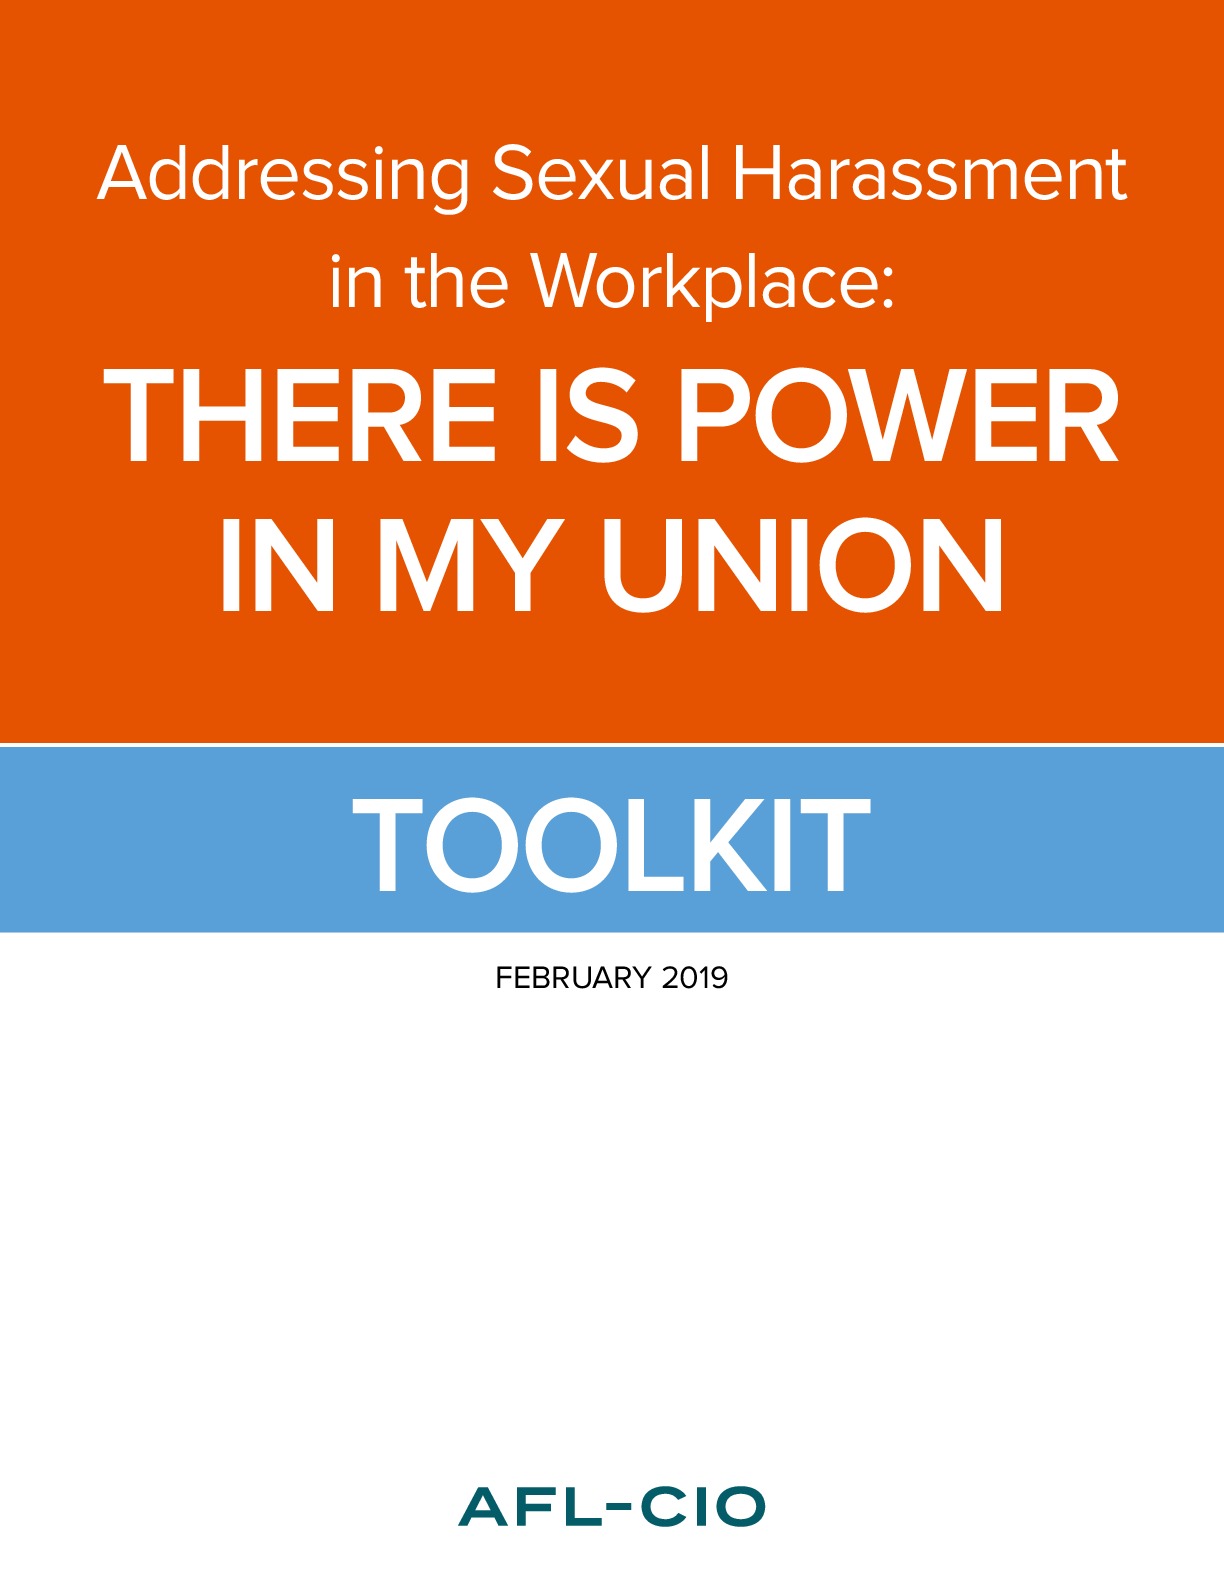 Role Of Trade Union In Workplace Sexual Harassment